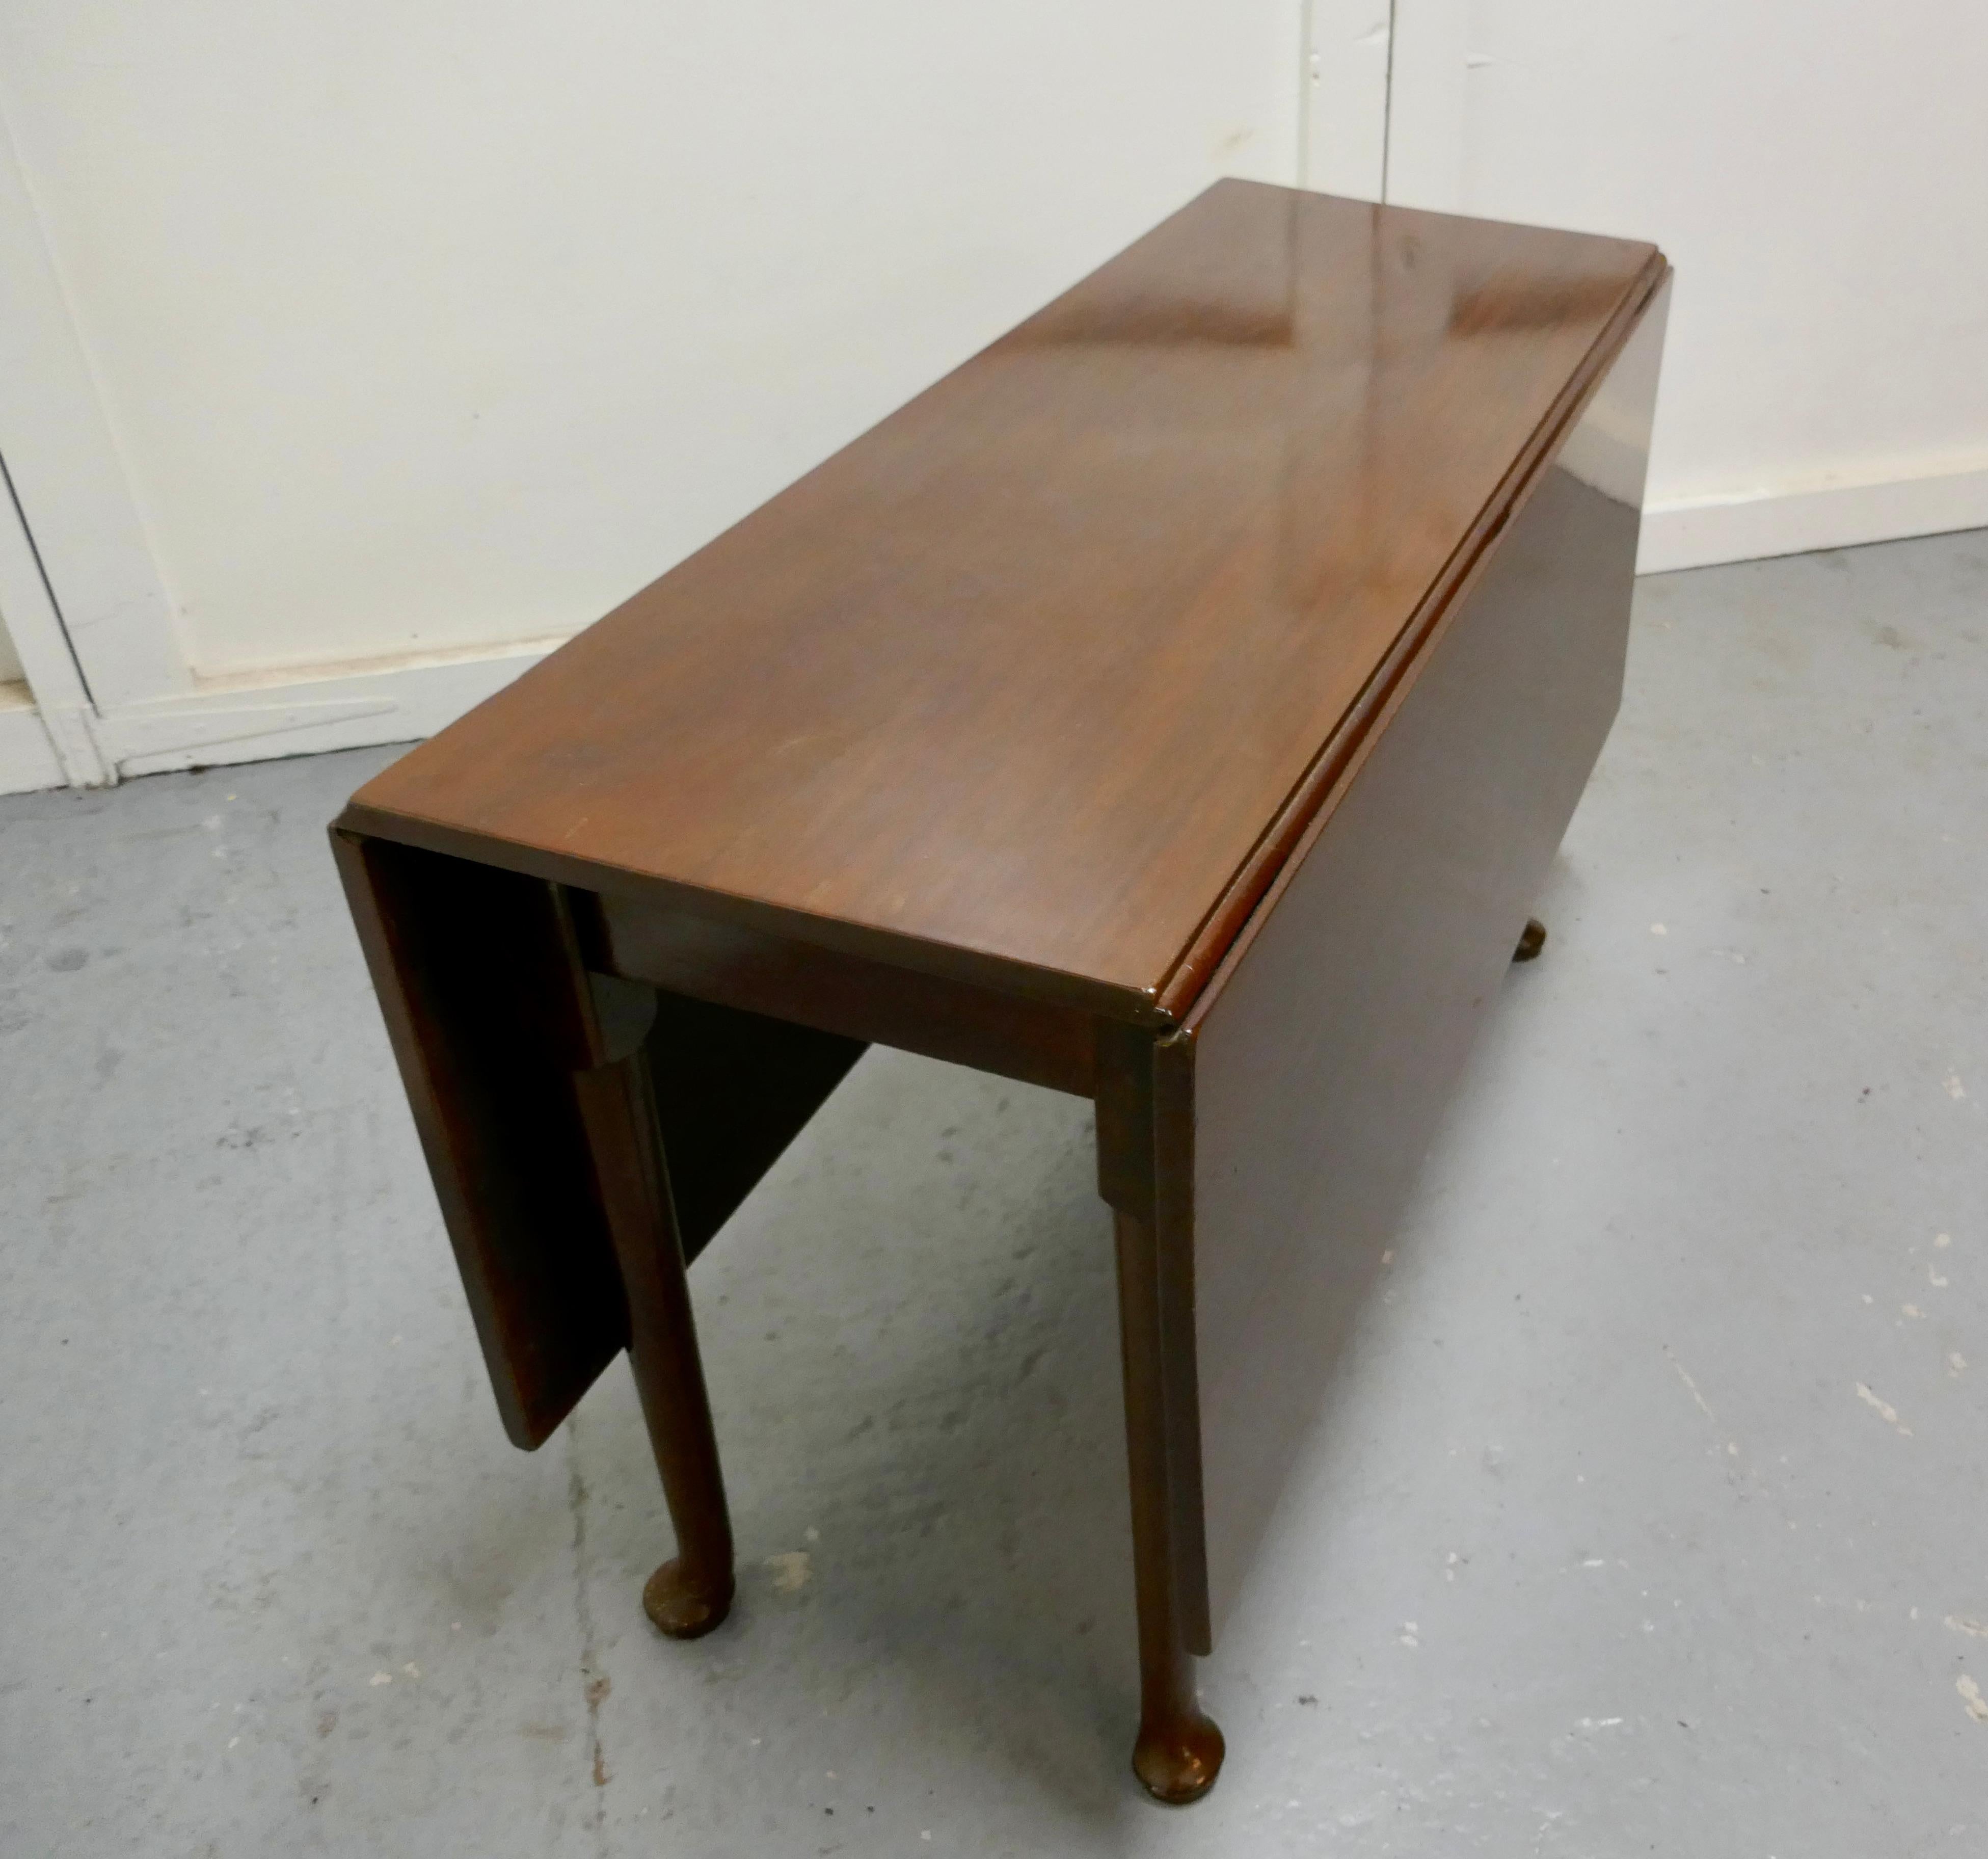 Georgian mahogany pad foot drop-leaf cottage diner, 

Georgian mahogany drop leaf dining table. 
This type of table is often know as cottage diner because it is space saving with the leaves down and opens to a large dining table when needed